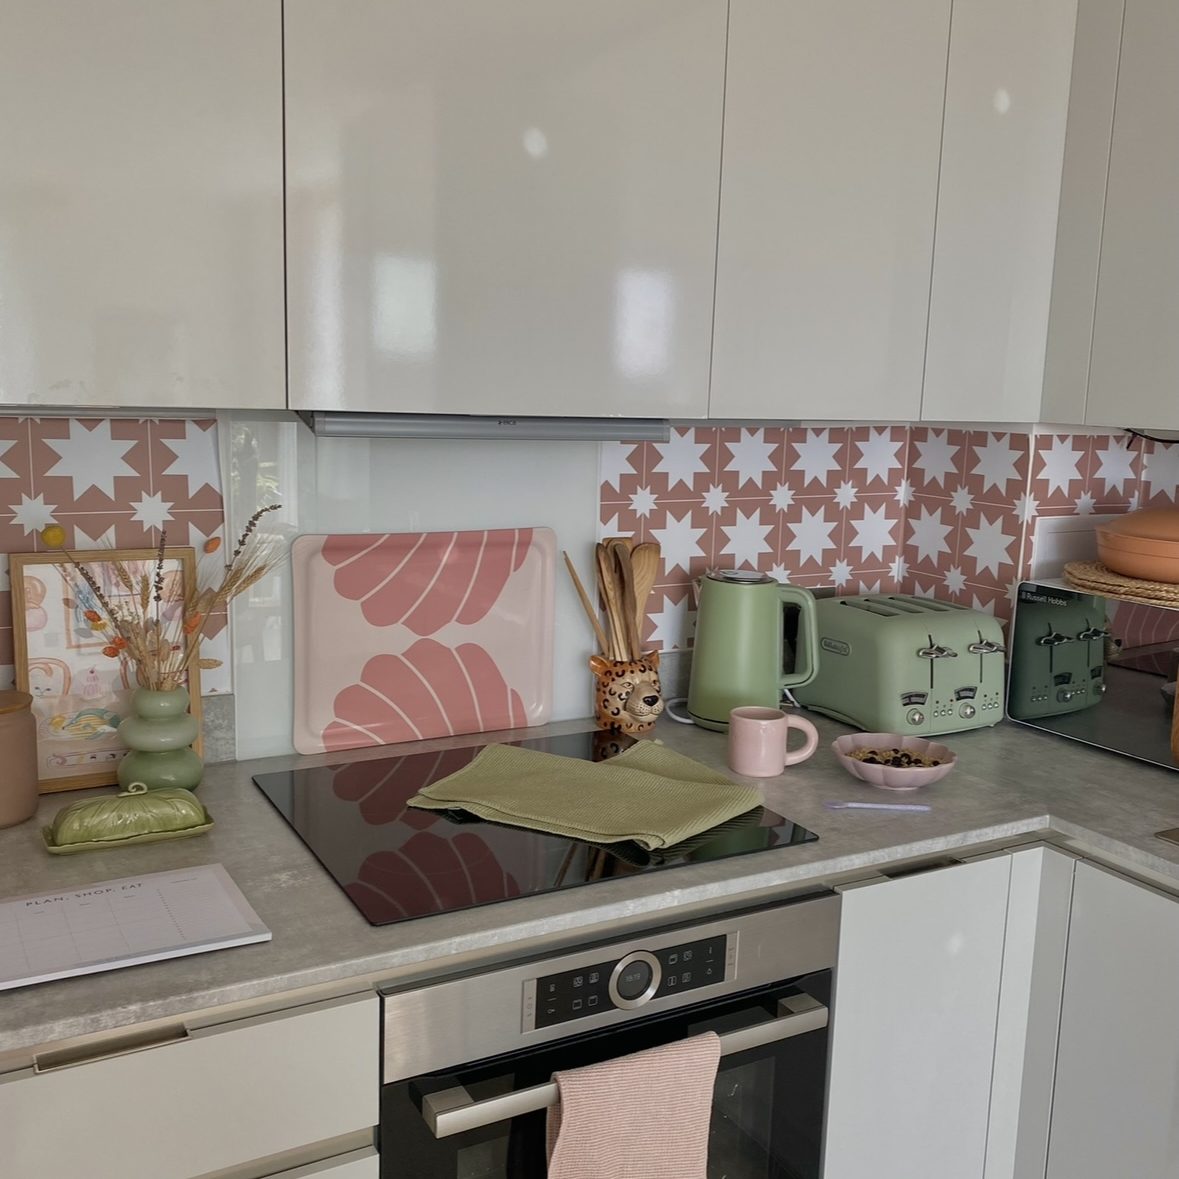 Rented kitchen that has used pink star peel-and-stick tiles.